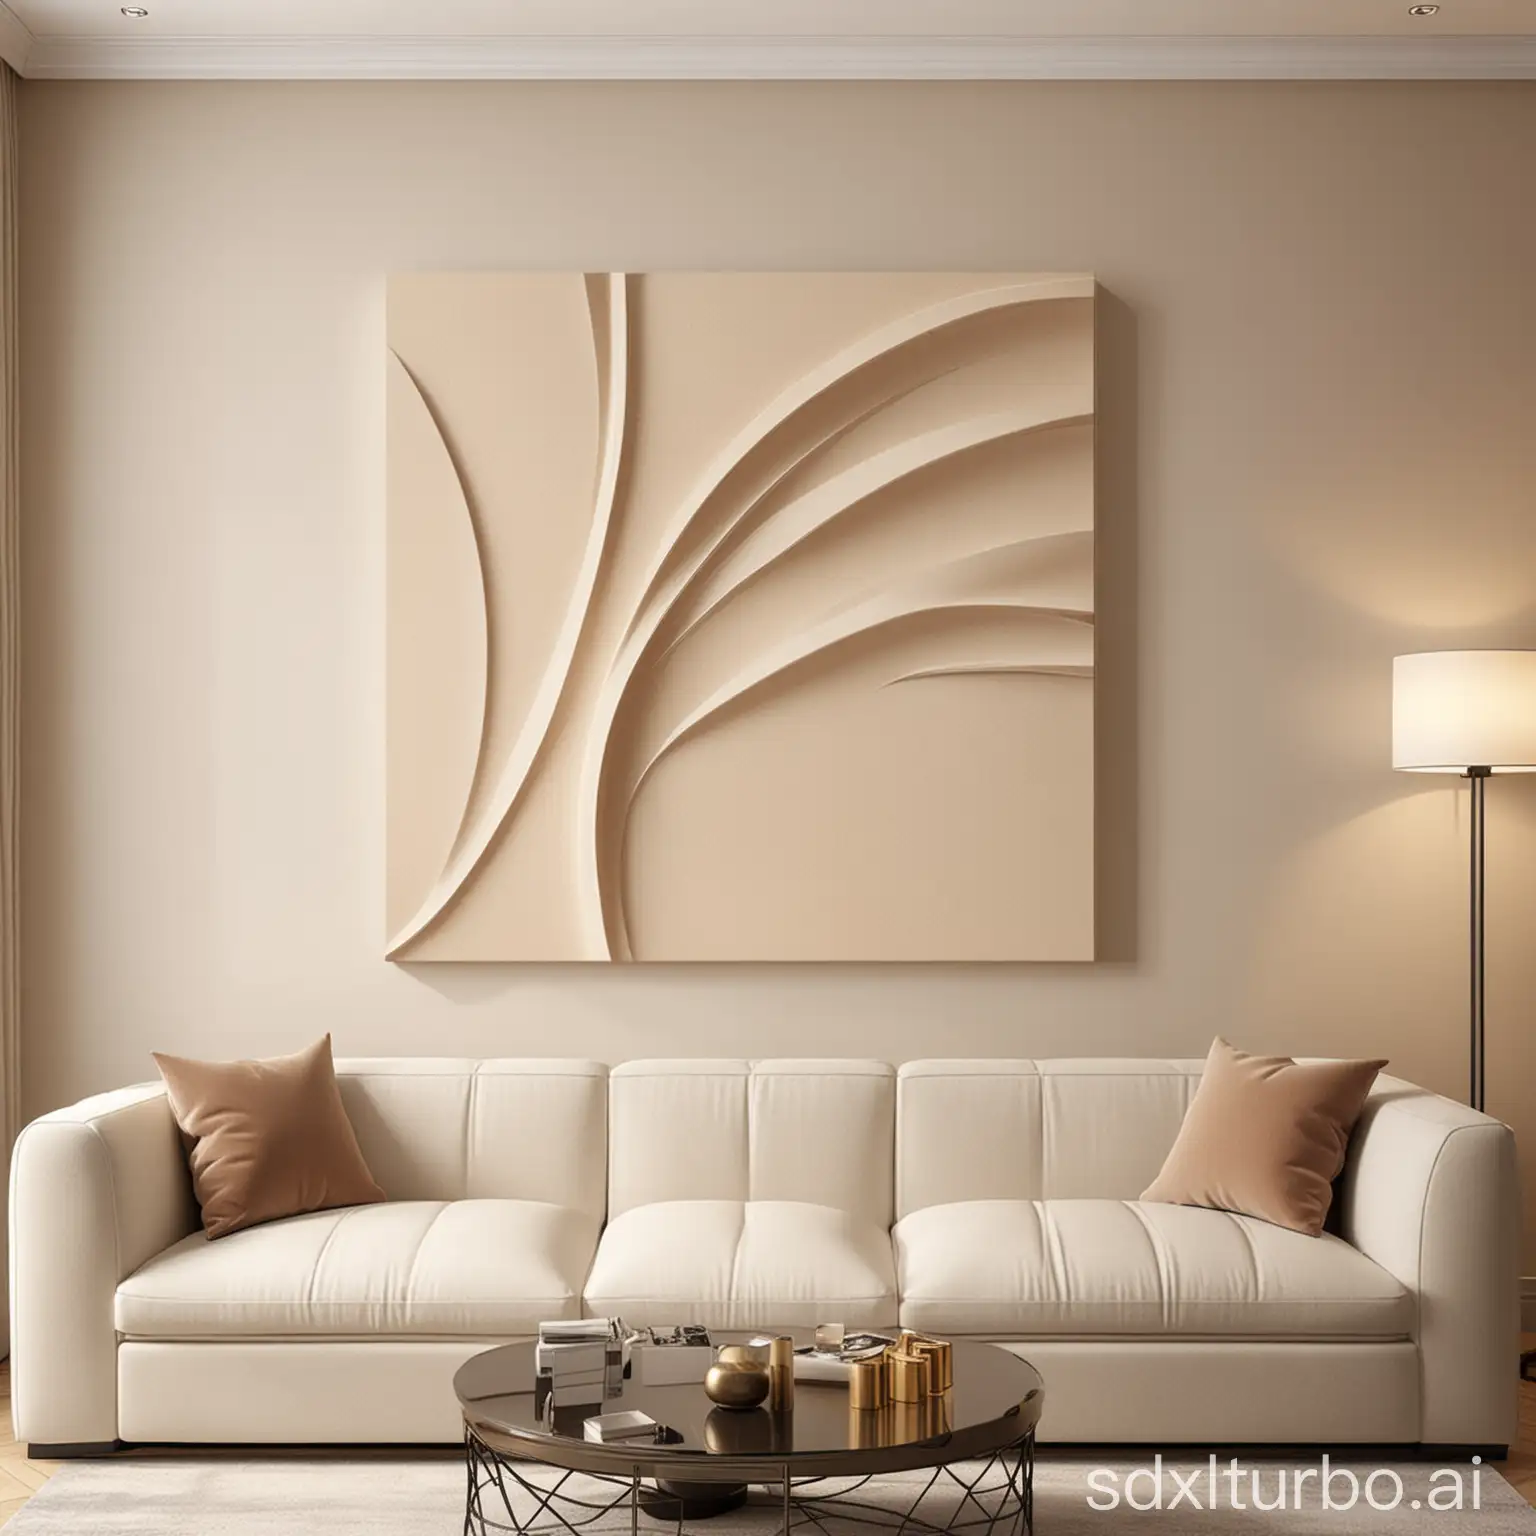 Abstract wall art, 3D sculpture, with beige, bold shape, background is living room, rectangle canvas,horizontal, smooth surface, living room, elegant minimalist design, modern home decor, real life